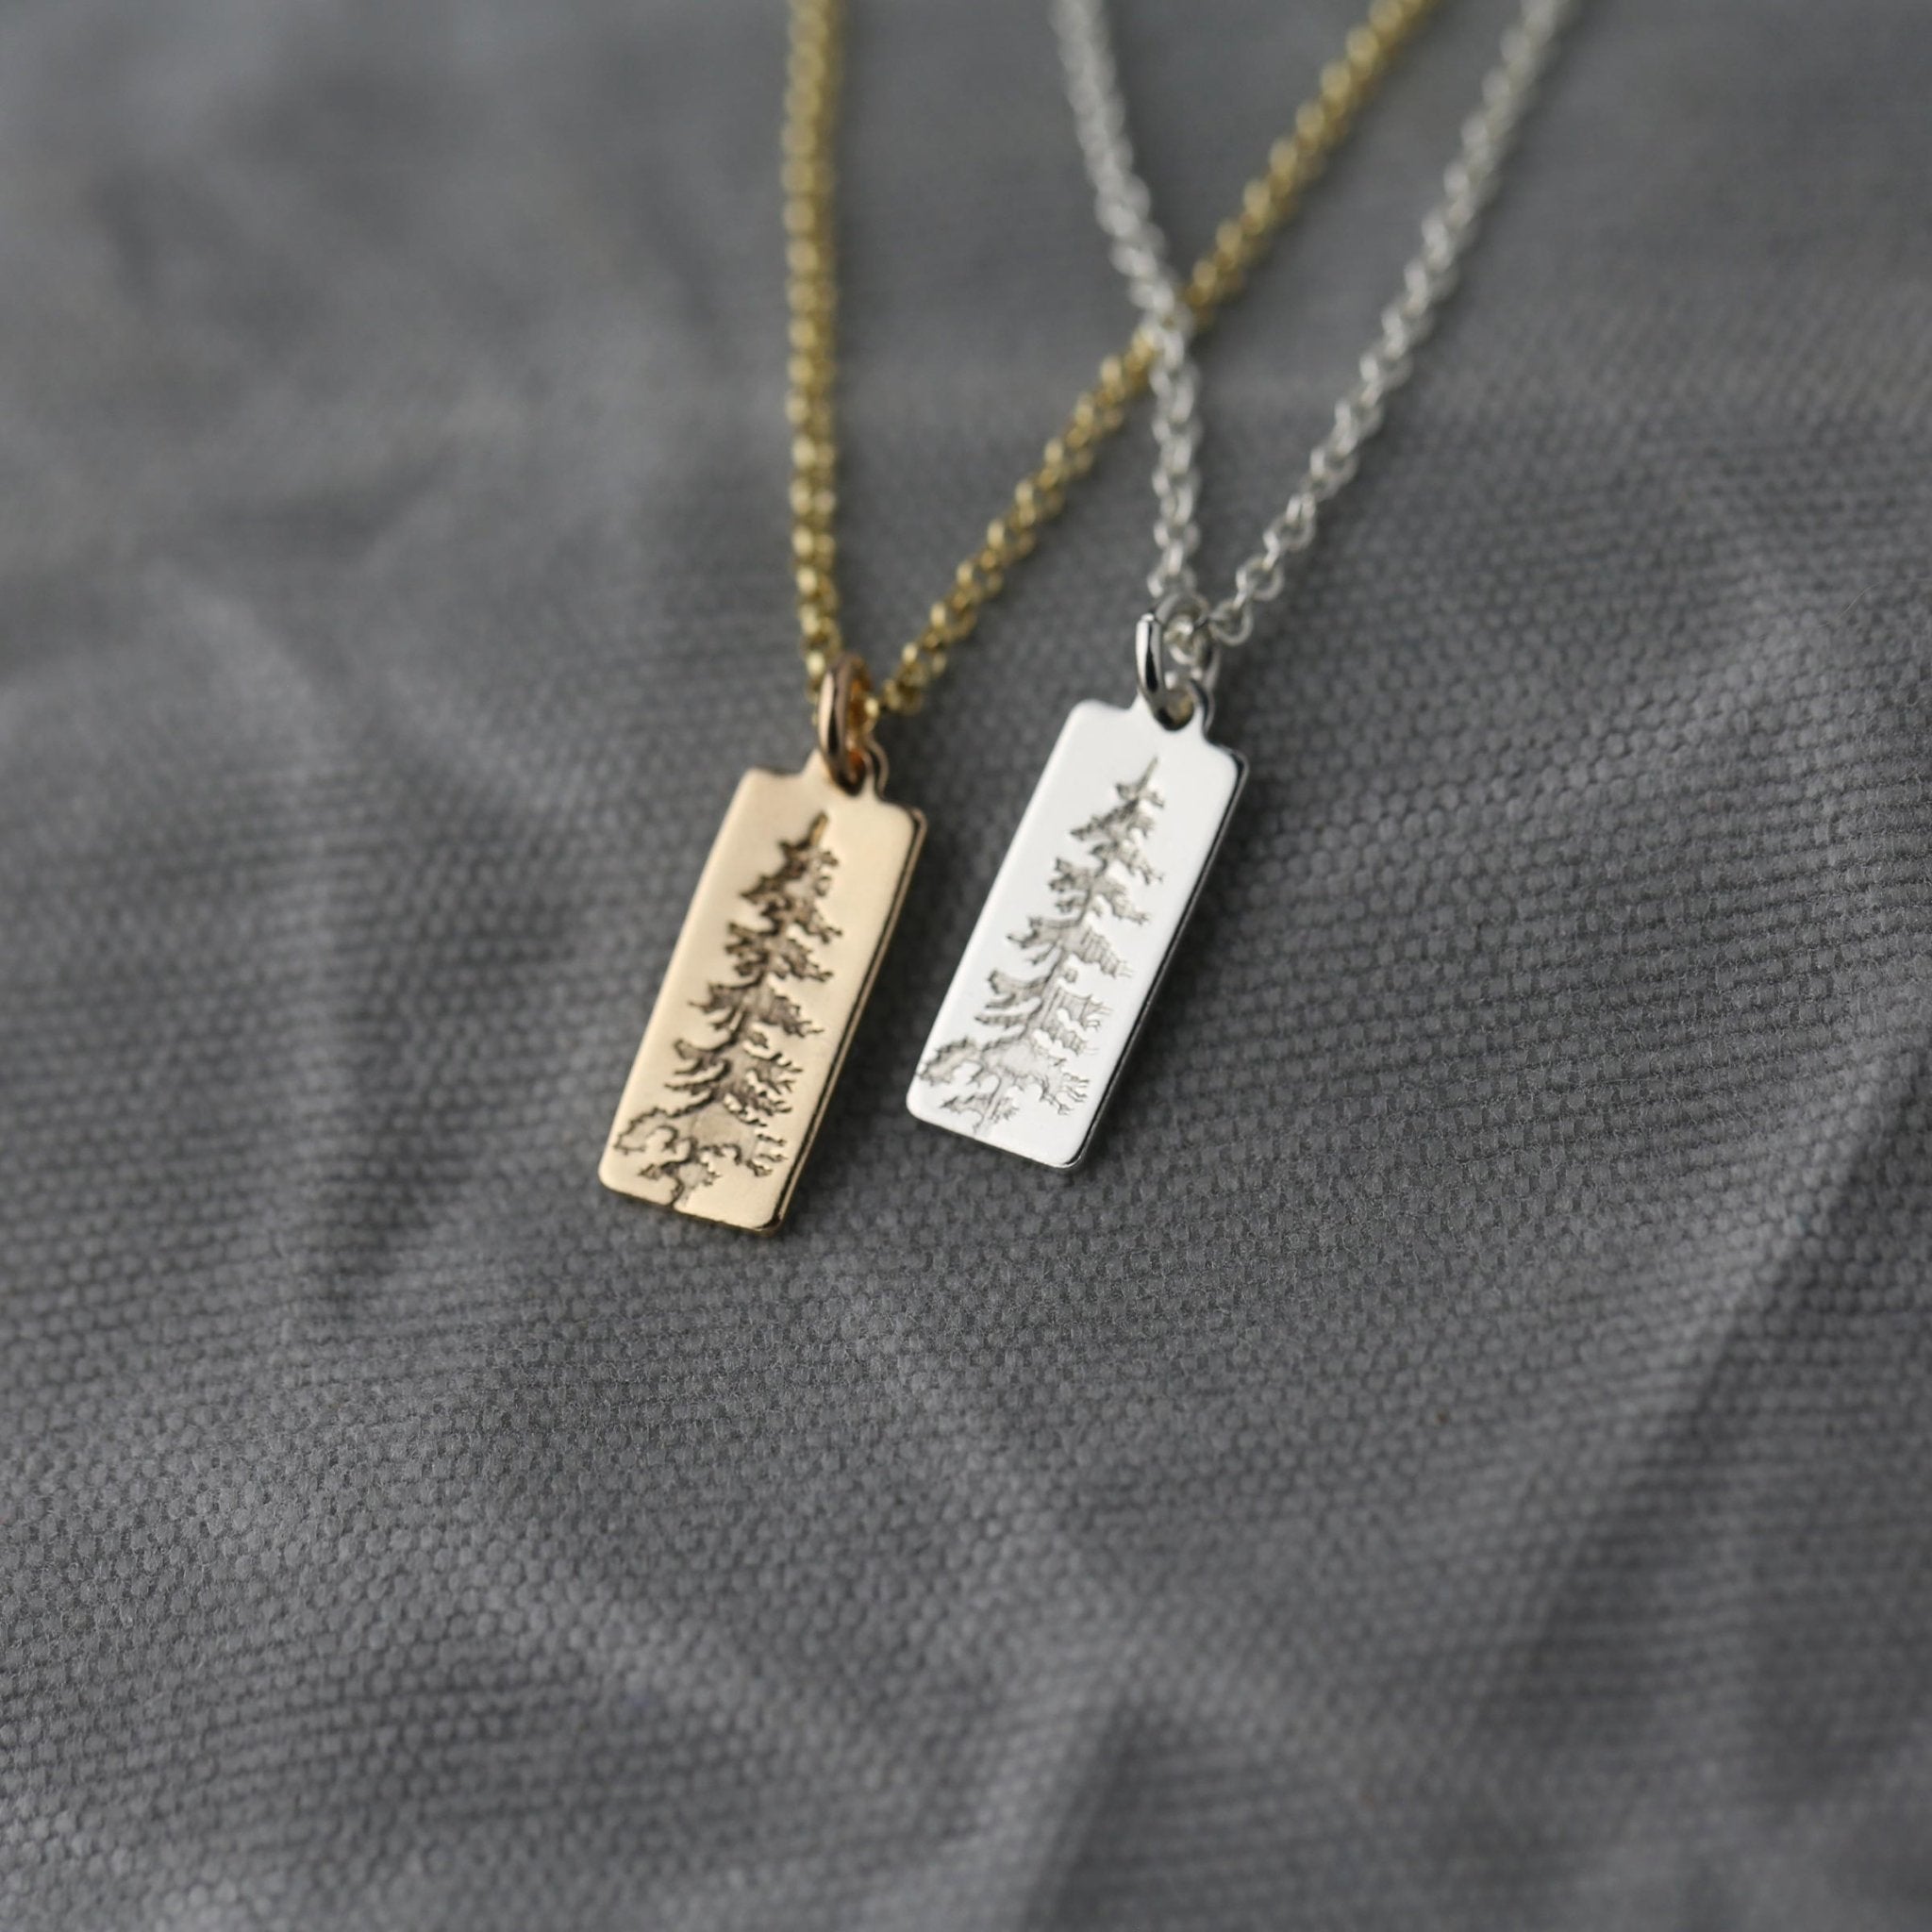 Hand Stamped Evergreen Tree Necklace handmade by Burnish